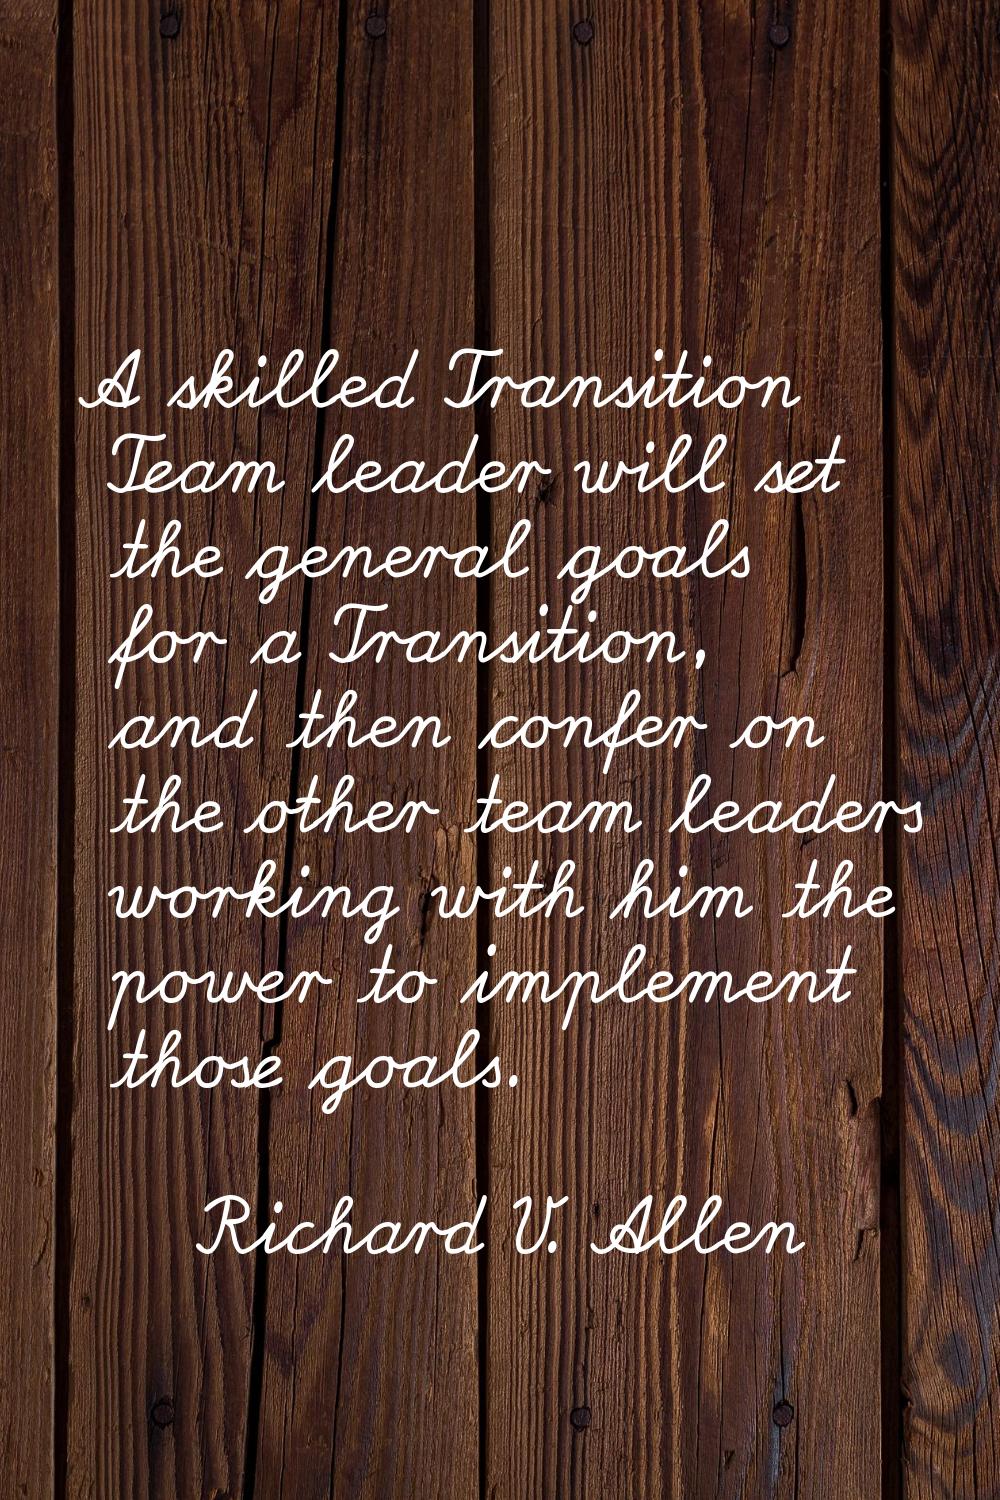 A skilled Transition Team leader will set the general goals for a Transition, and then confer on th